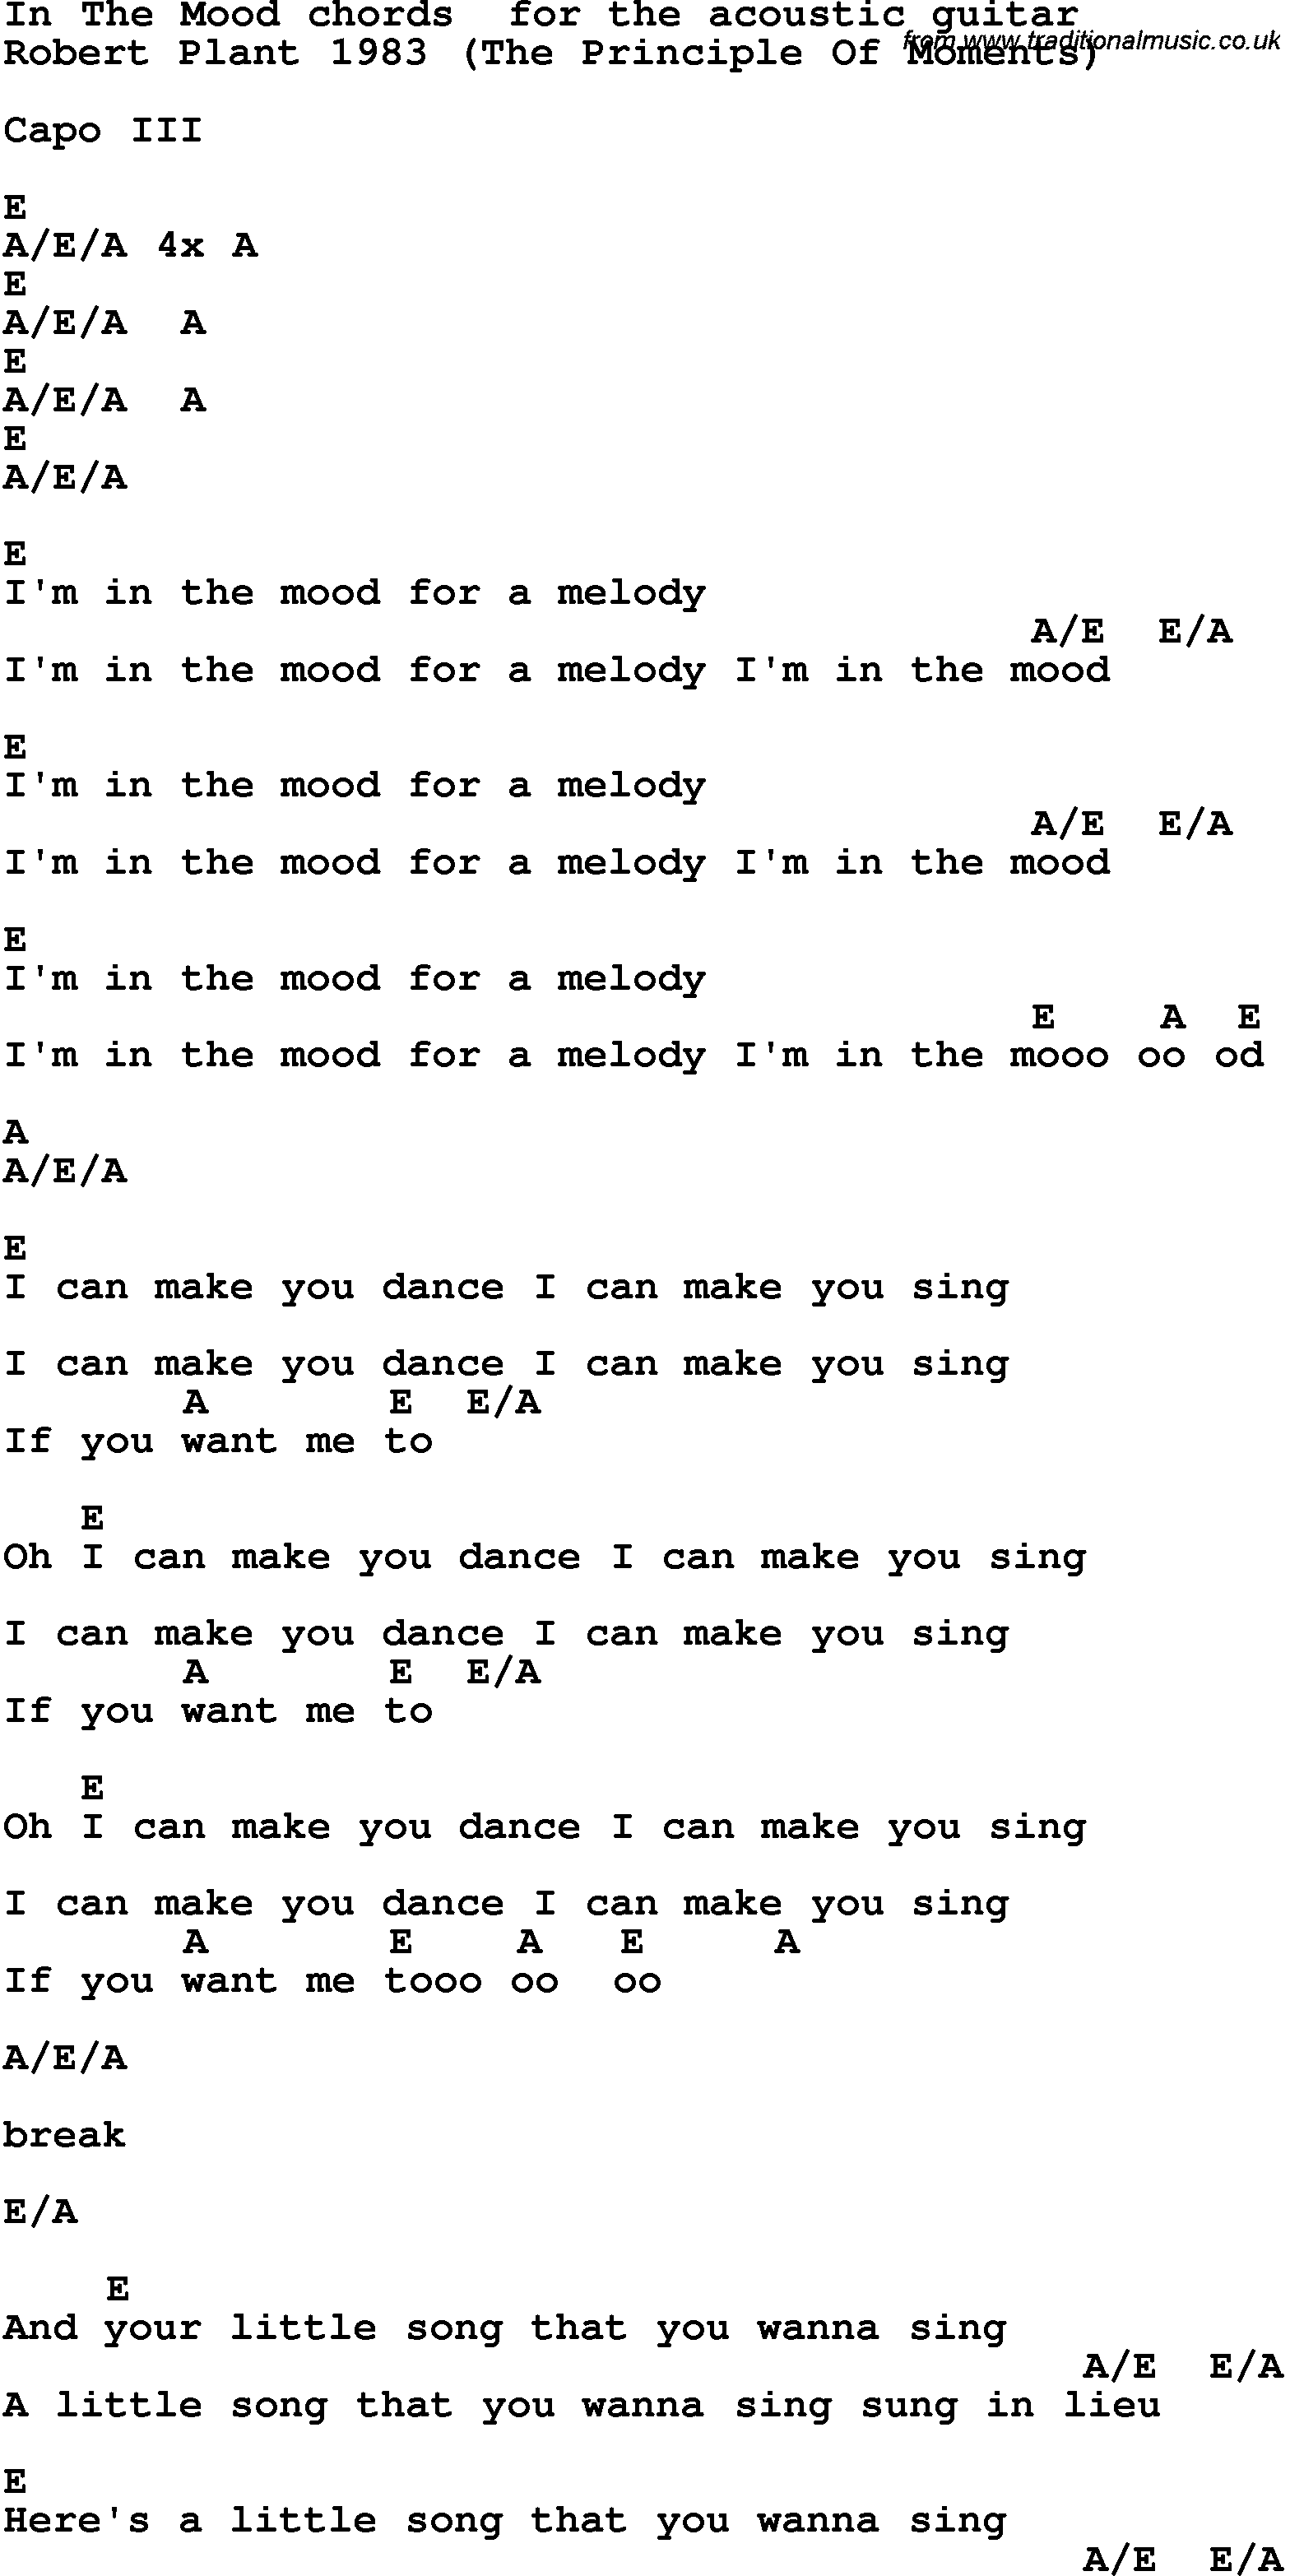 Song Lyrics with guitar chords for In The Mood